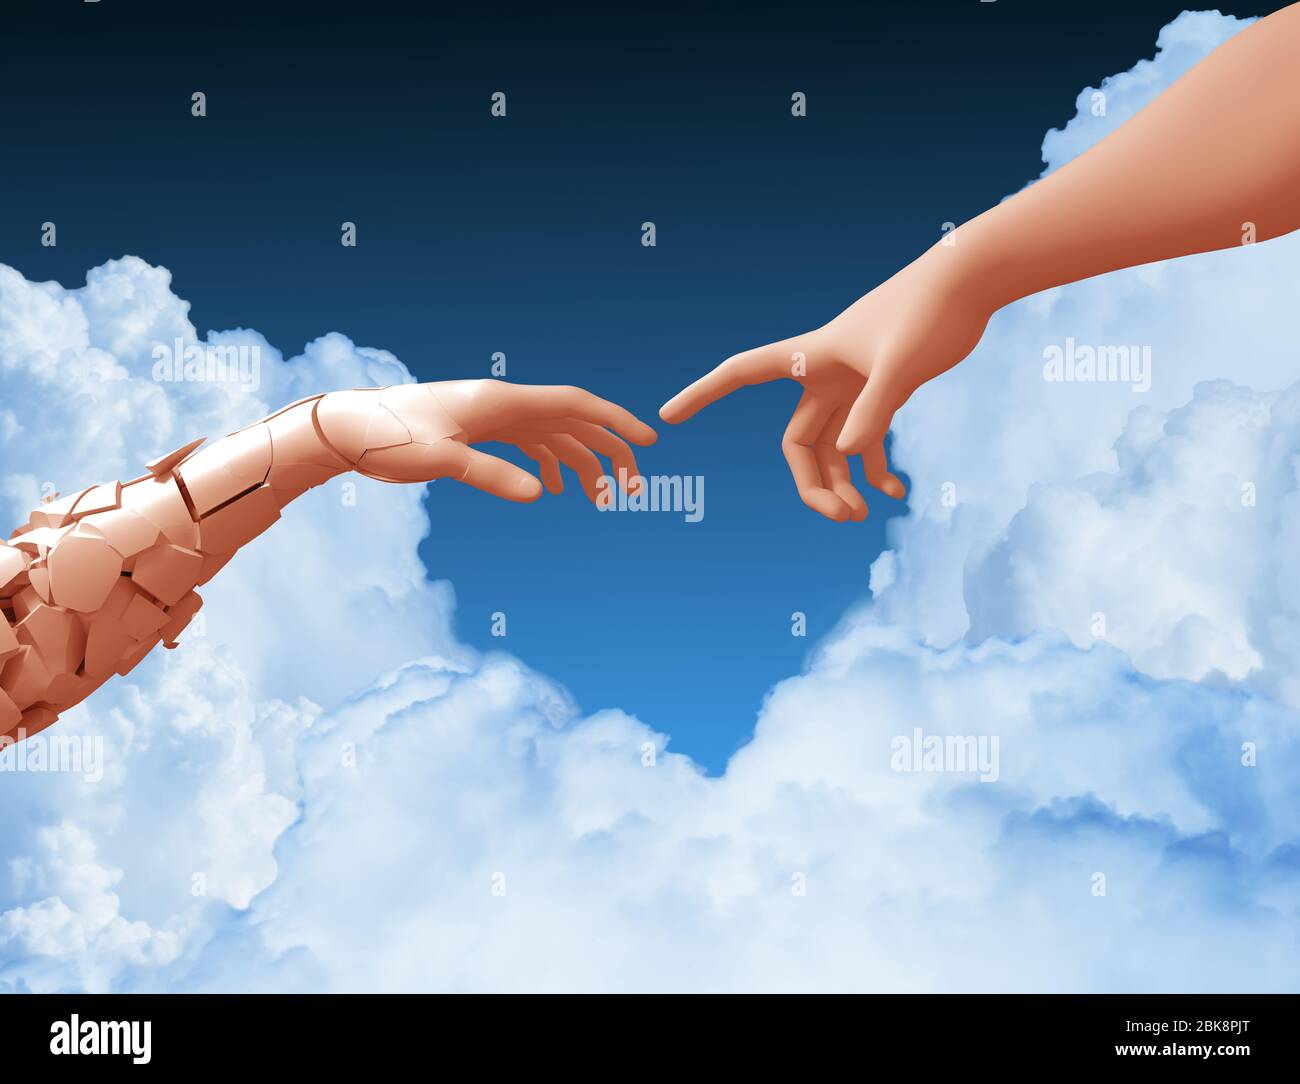 Two Hands And Clouds In The Blue Sky Create A Heart Shape Stock Photo